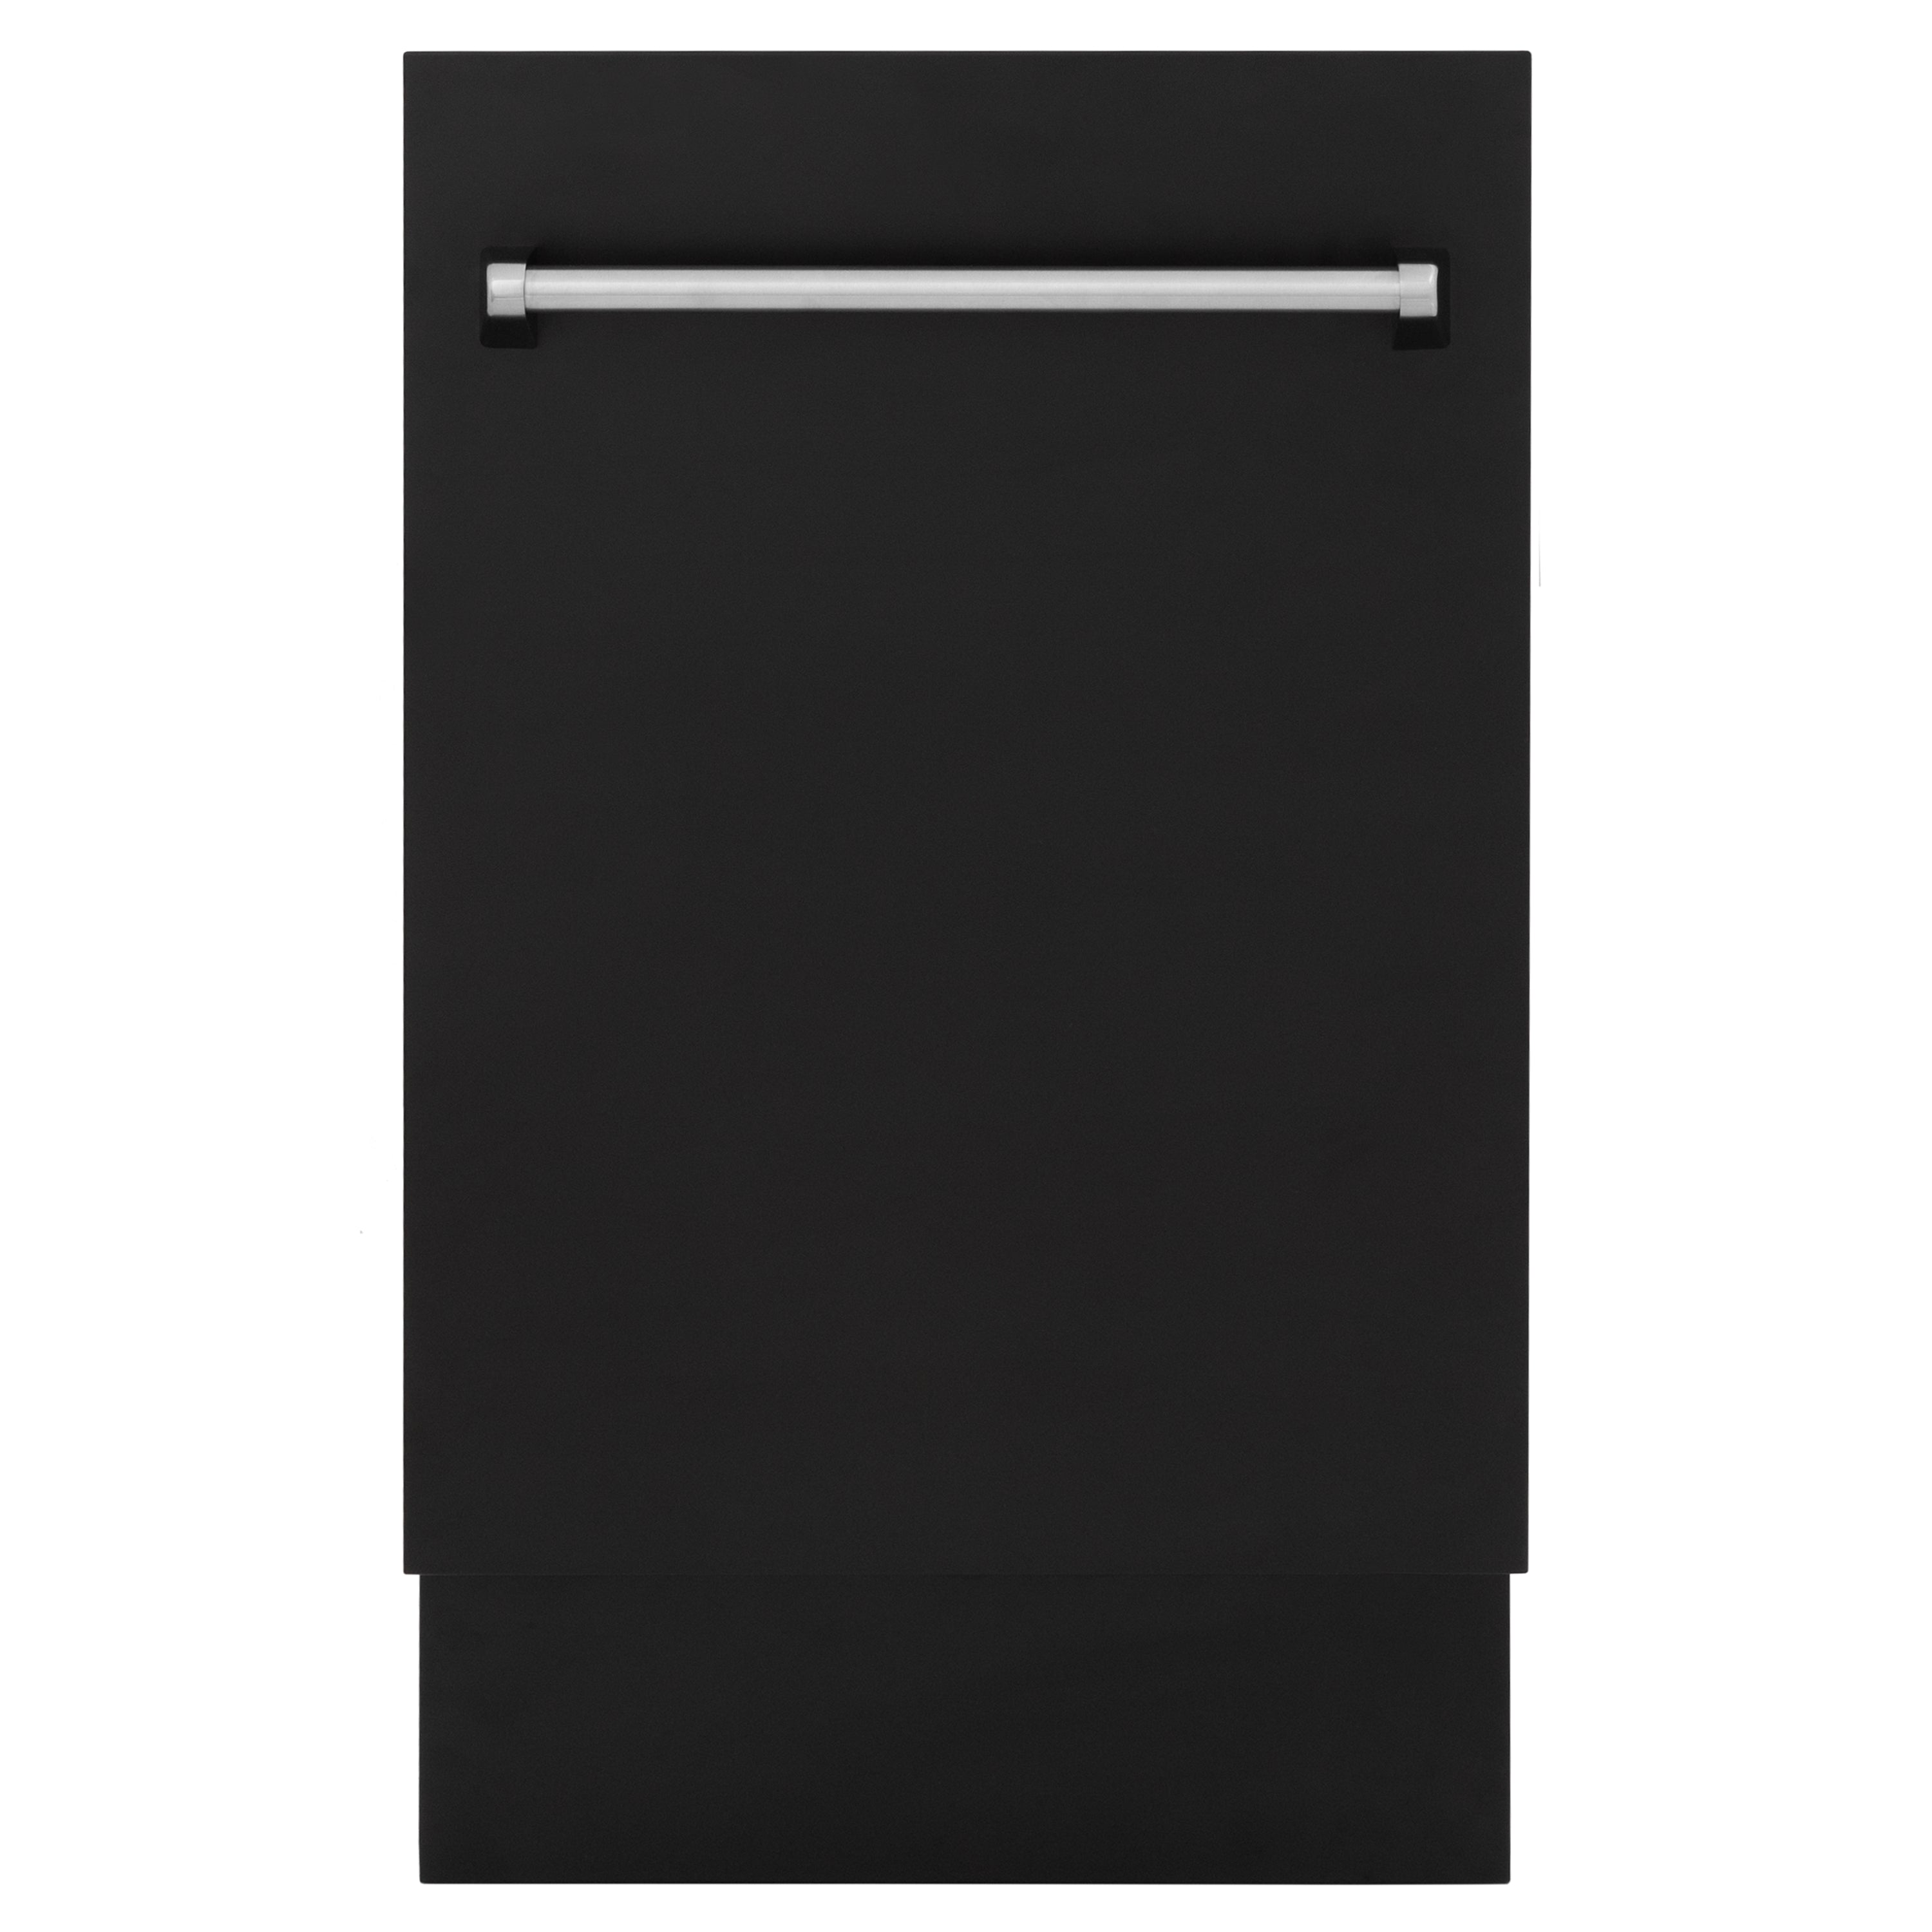 ZLINE 18" Tallac Series 3rd Rack Top Control Built-In Dishwasher in Black Matte with Stainless Steel Tub, 51dBa (DWV-BLM-18)